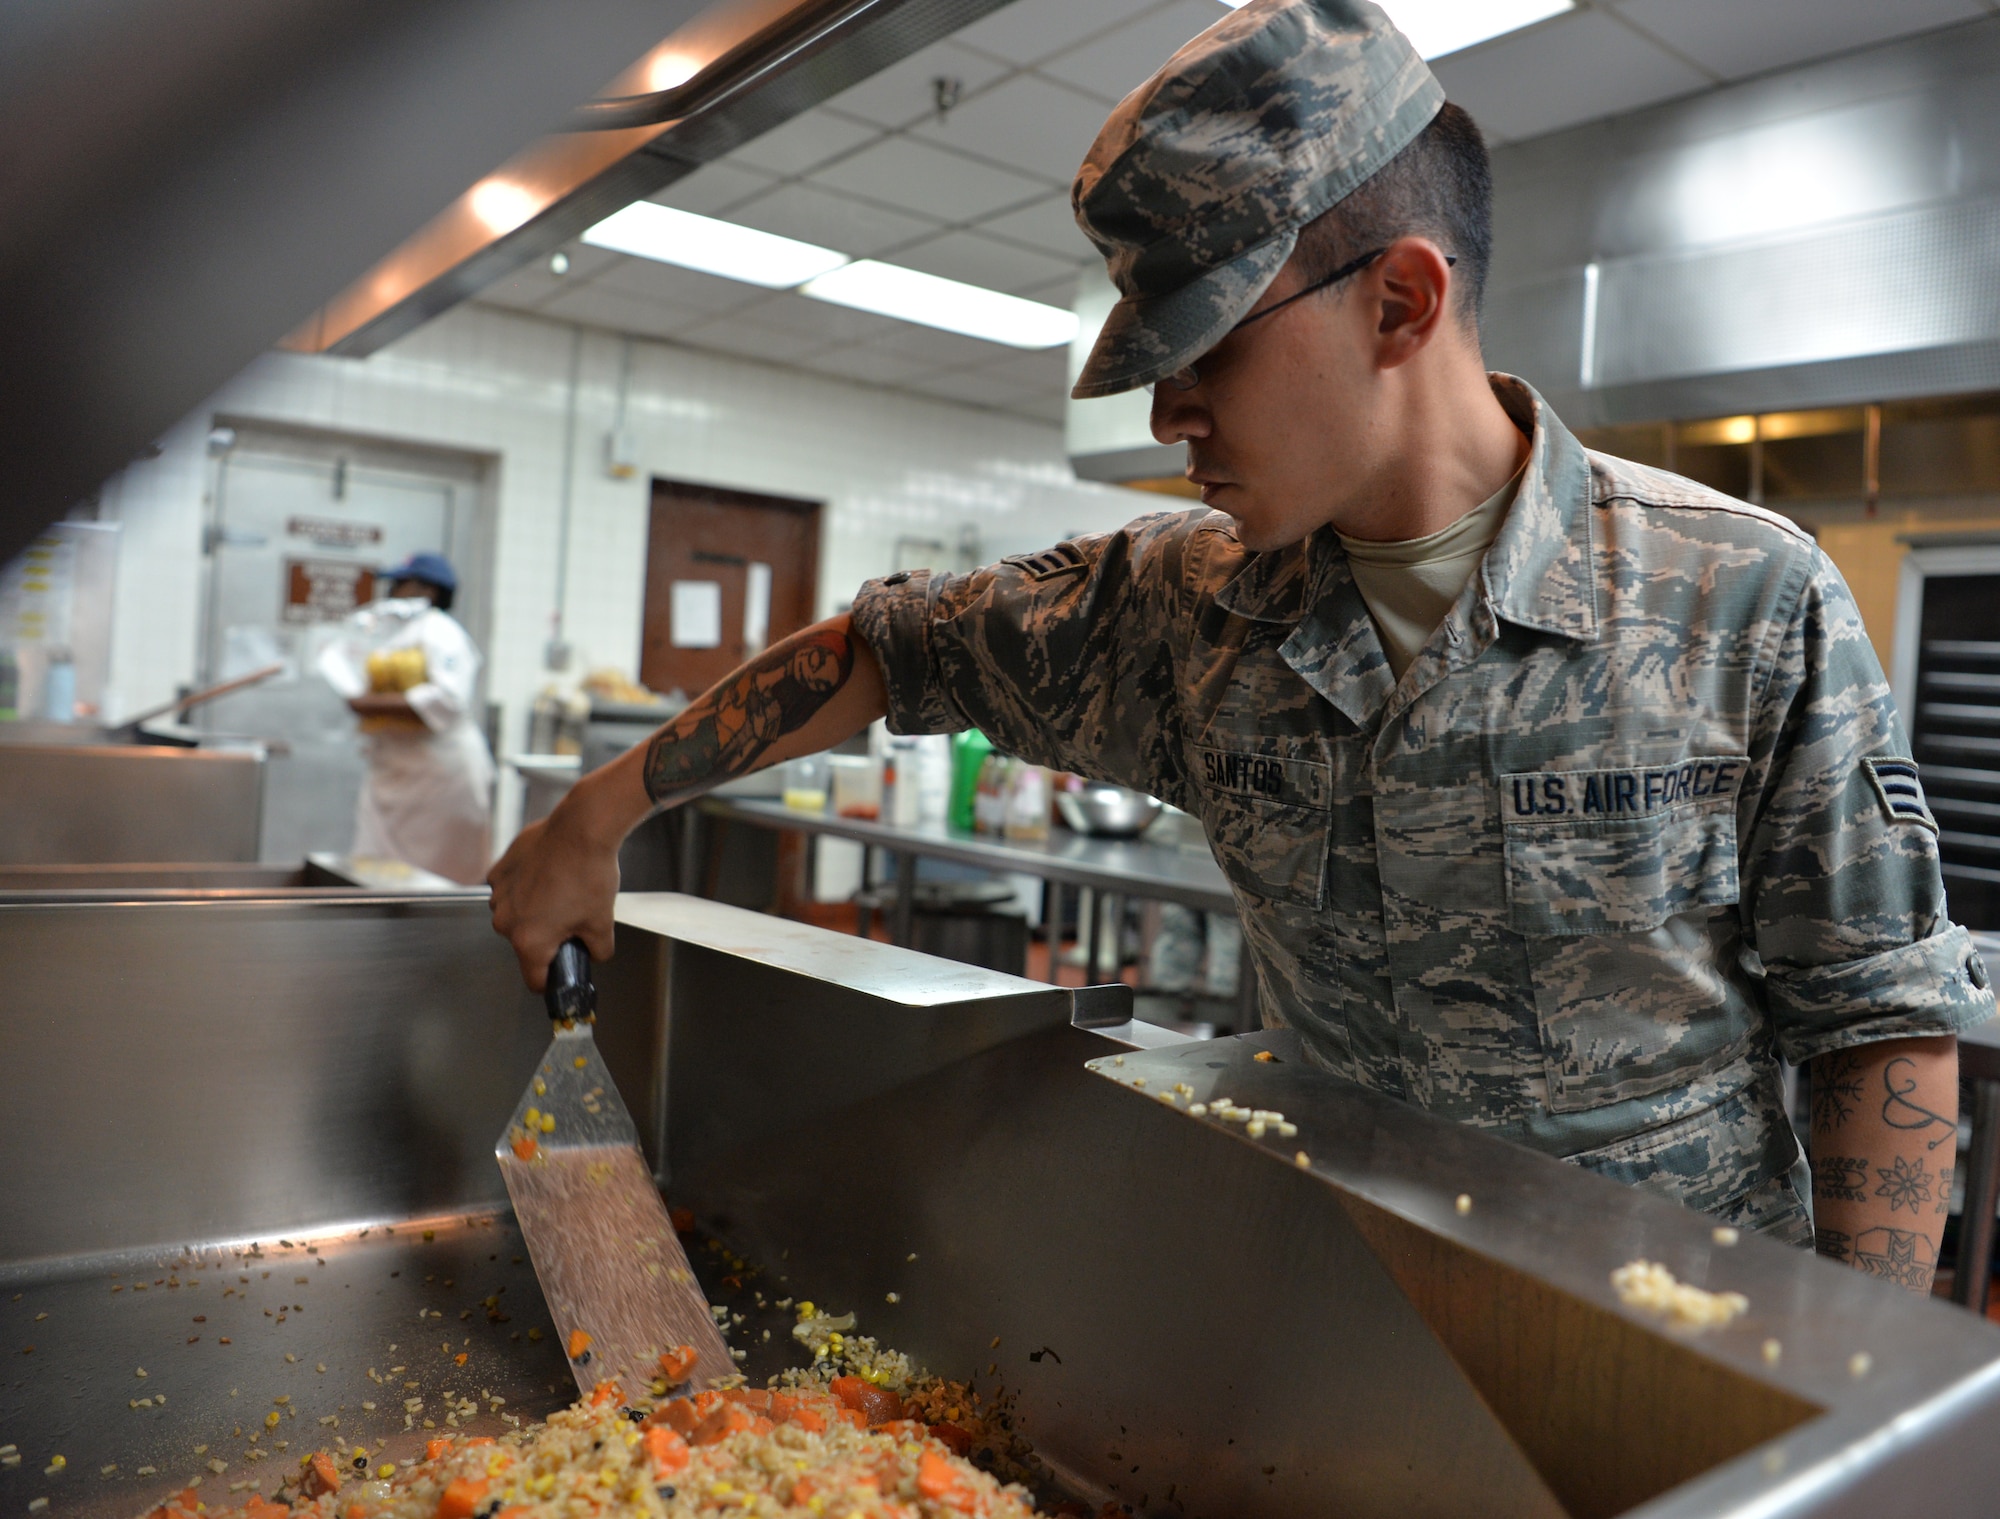 Senior Airman Joseph Santos, 99th Force Support Squadron food service journeyman, prepares lunch for service members during Red Flag 19-3 at Nellis Air Force Base, Nev., July 18, 2019. Red Flag is a combat training exercise involving the U.S. Air Force and its joint and coalition partners. (U.S. Air Force photo by Tech. Sgt. Bryan Magee)